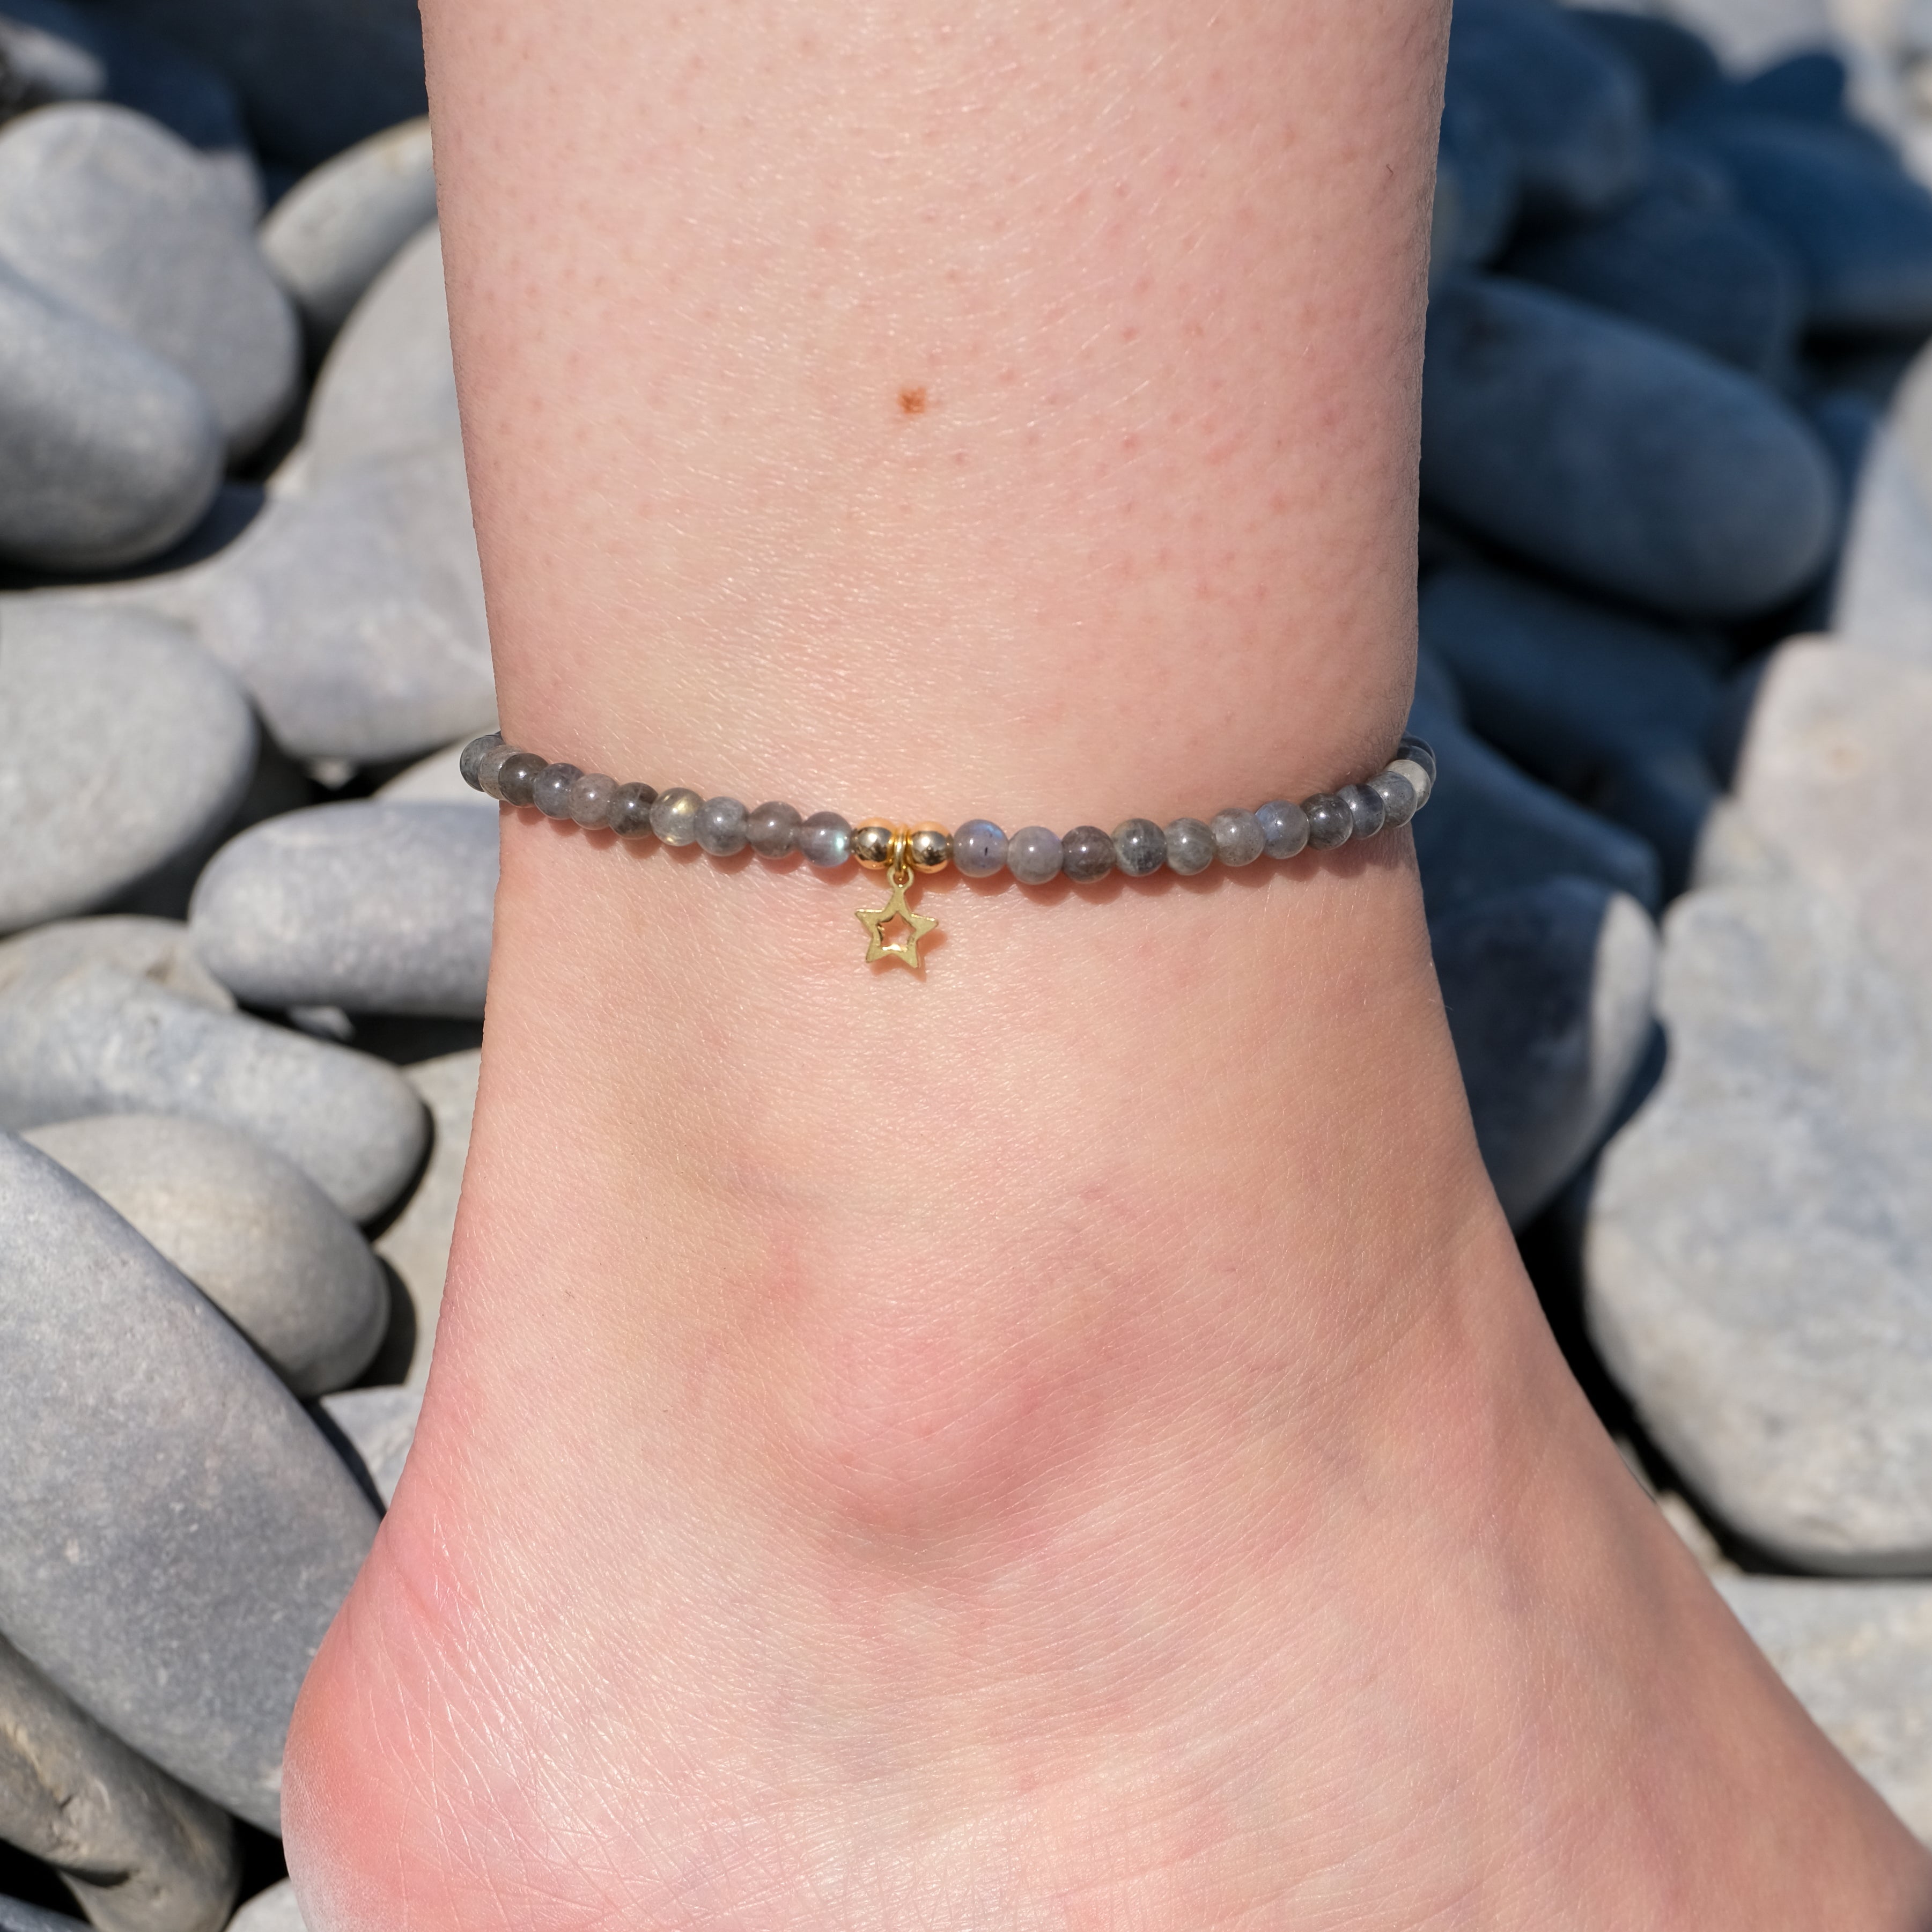 Labradorite crystal anklet with gold star